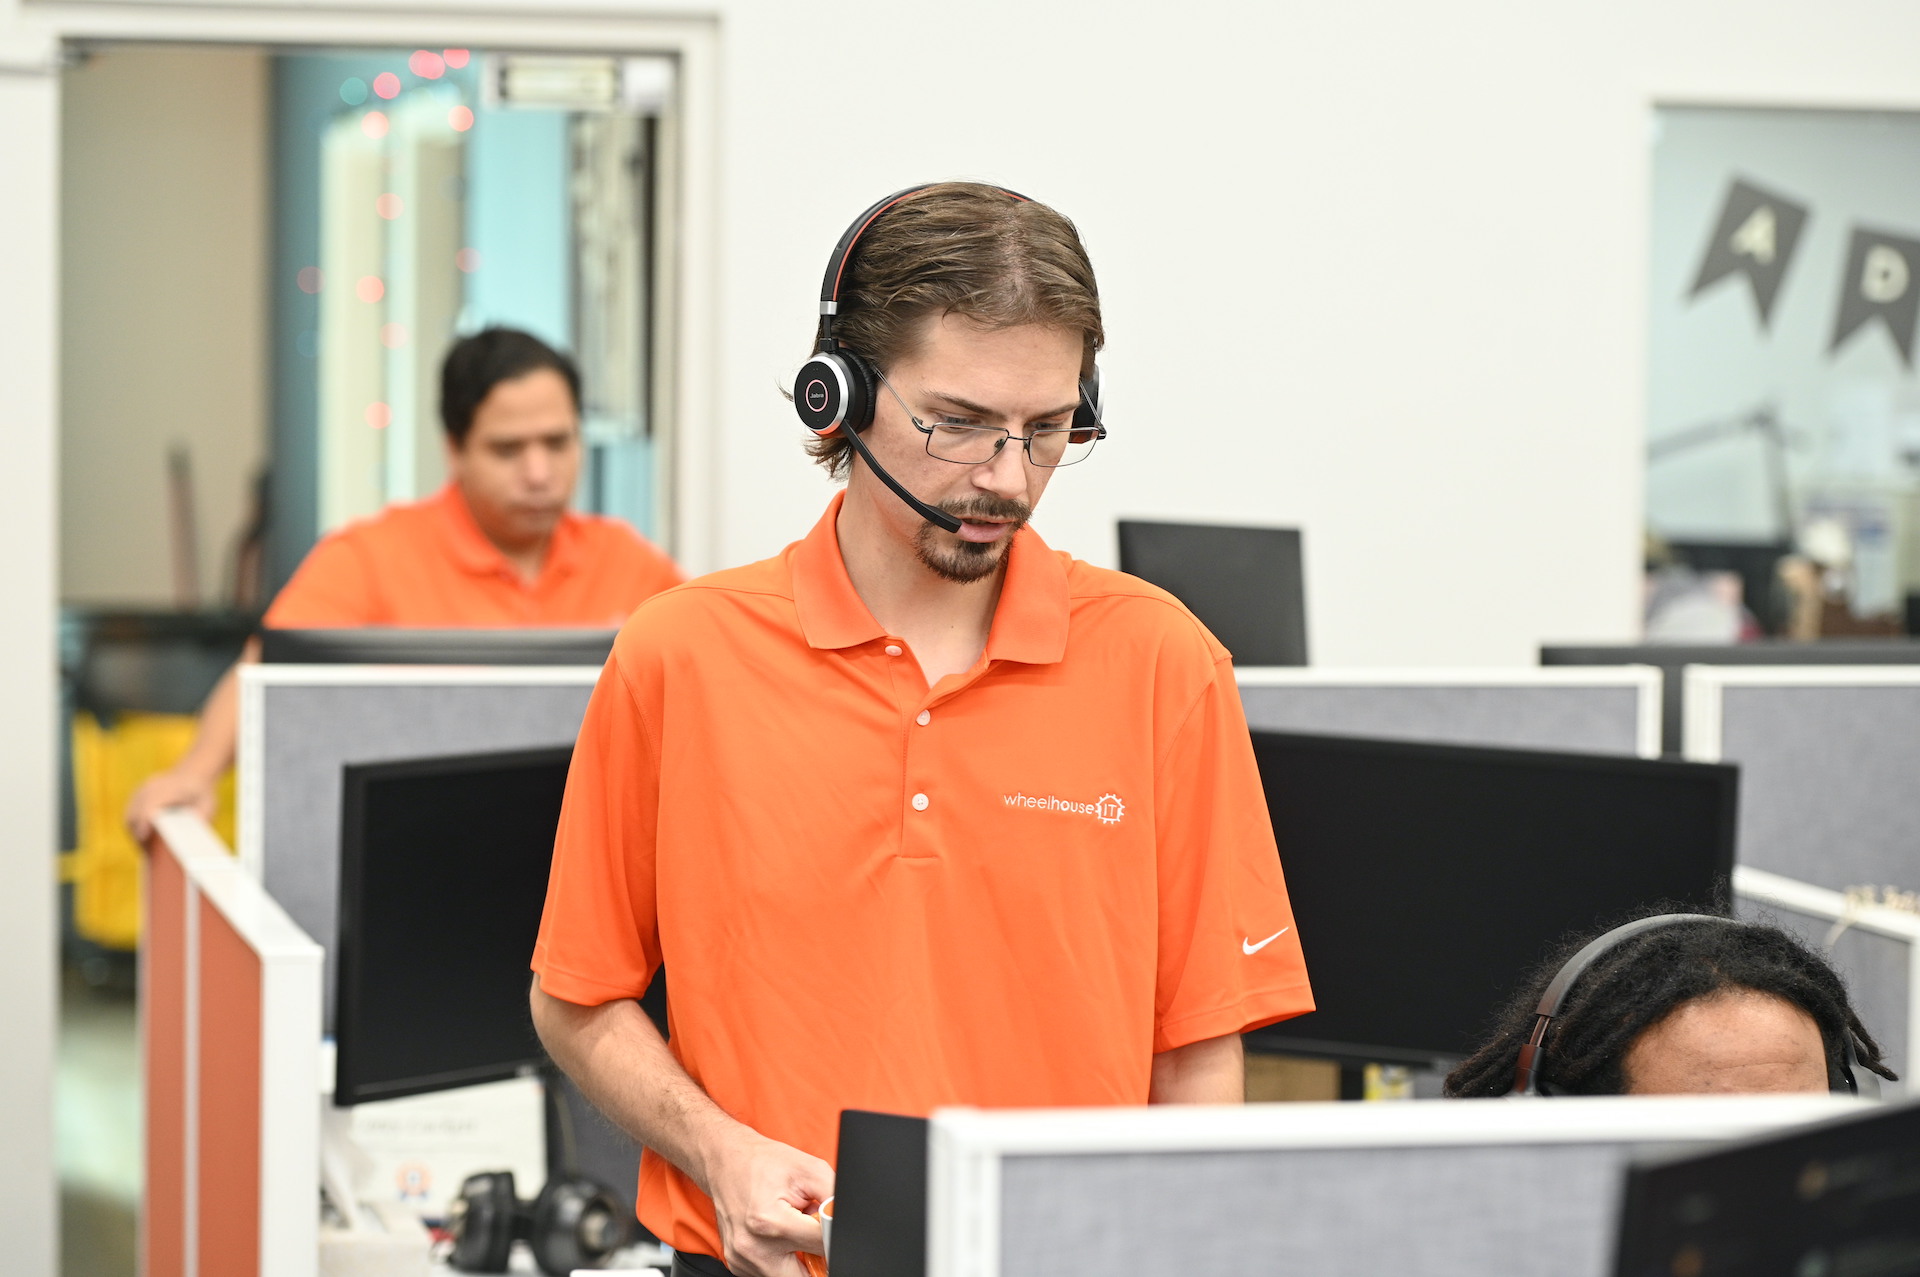 two men in orange shirts are working on computers